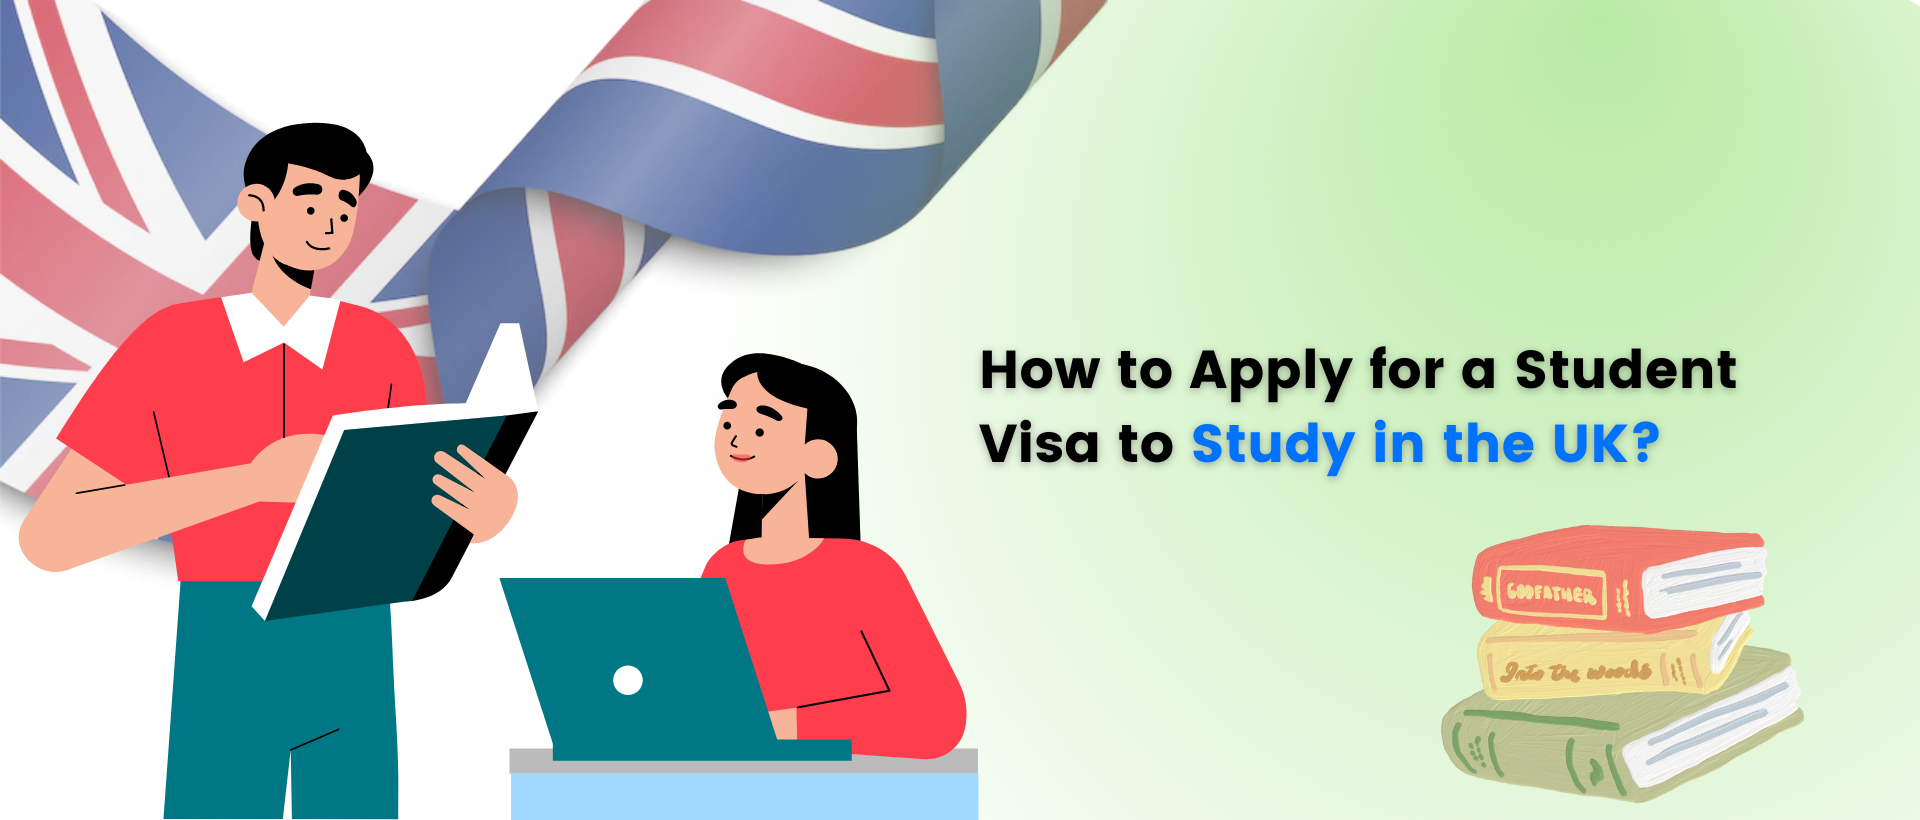 How to apply for a student visa to study in the uk